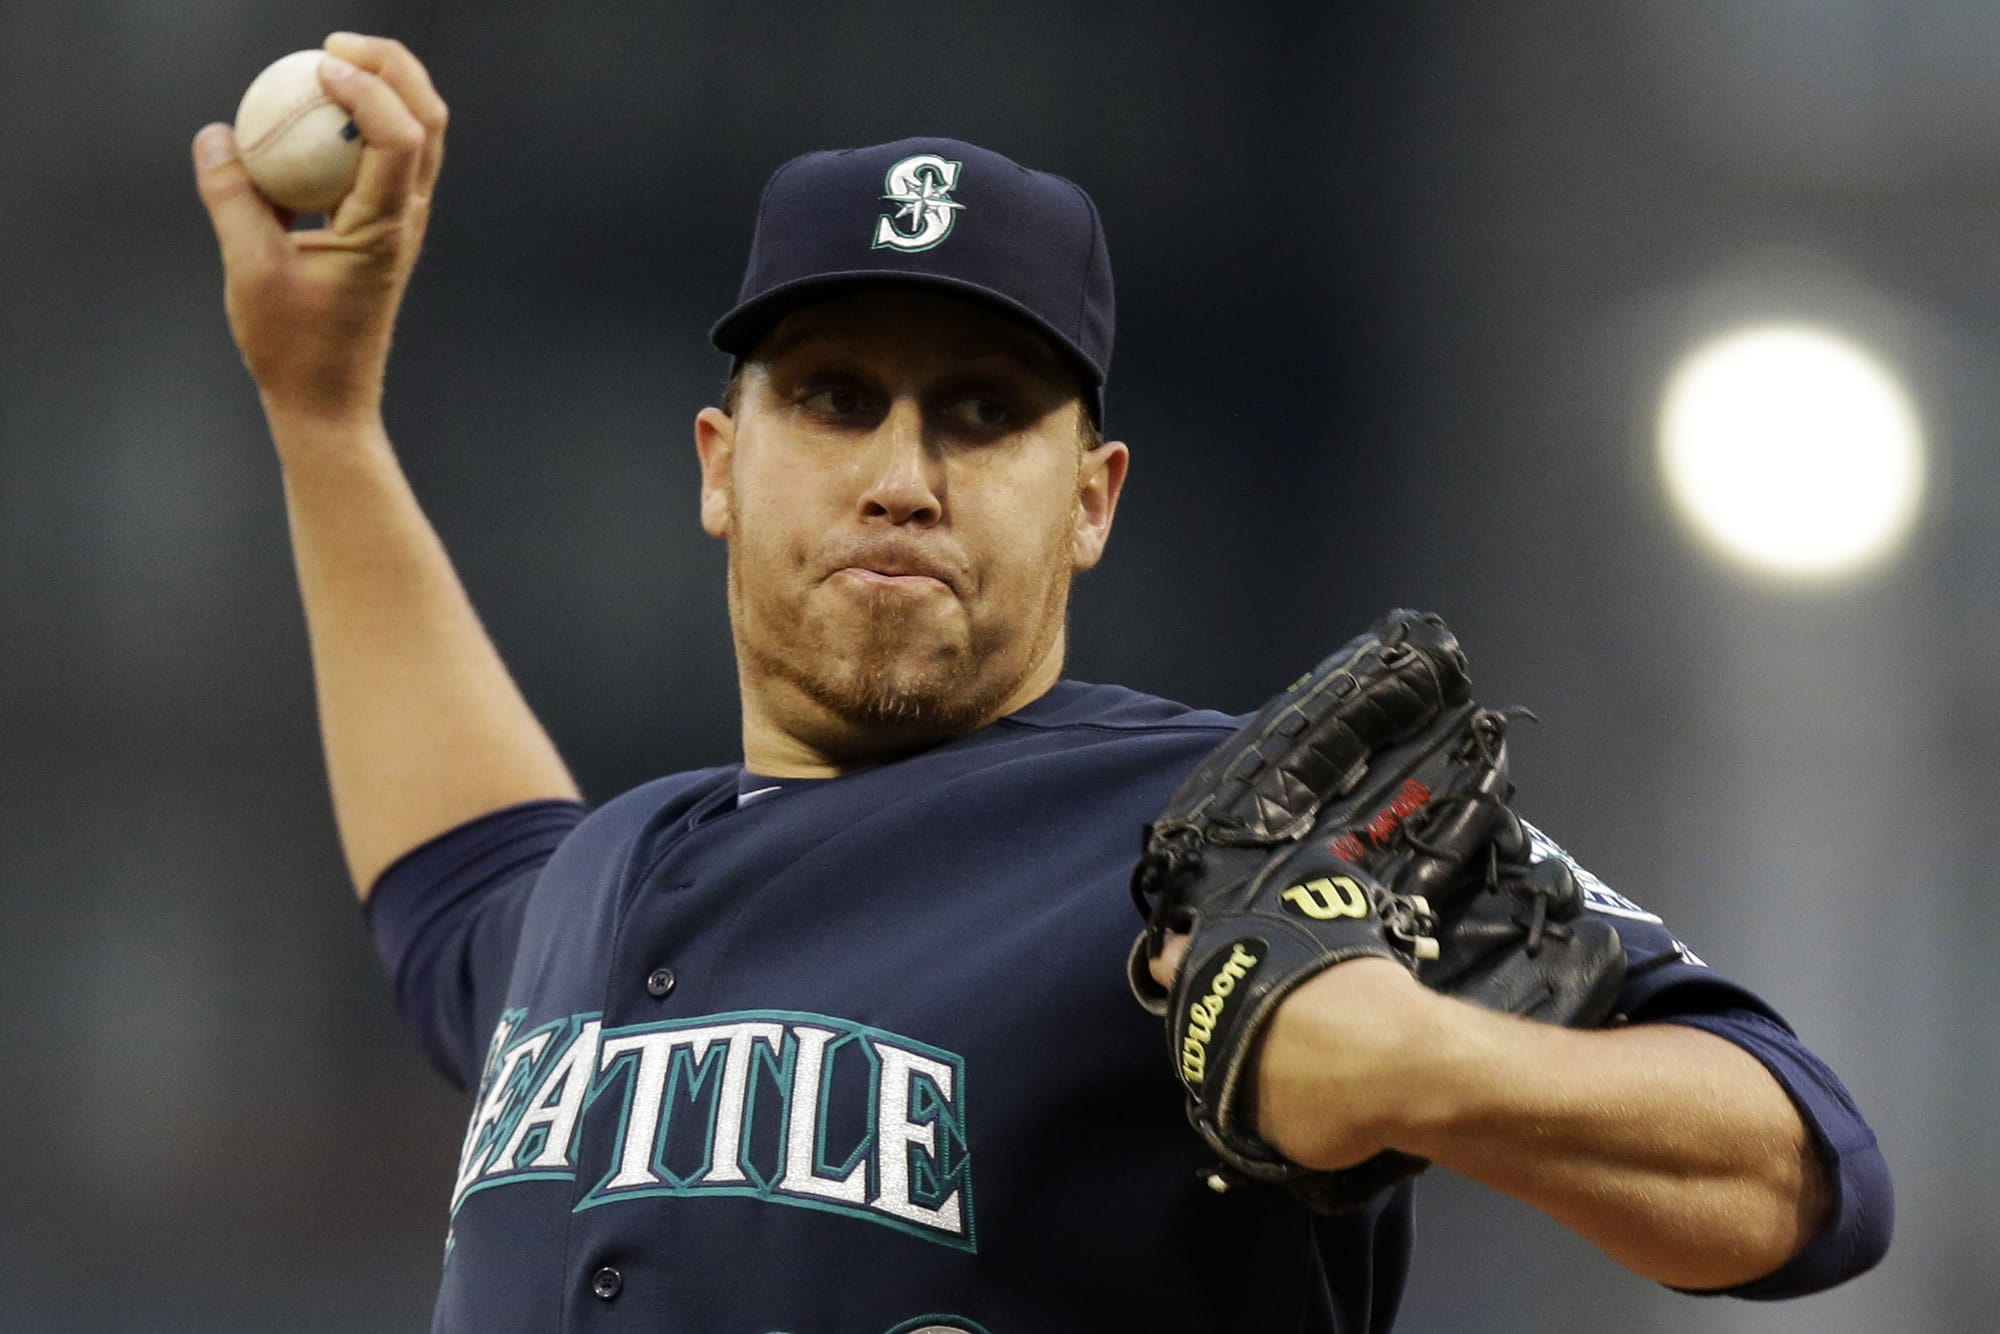 Seattle Mariners starting pitcher Aaron Harang delivers during the first inning of an interleague baseball game against the Pittsburgh Pirates in Pittsburgh, Tuesday, May 7, 2013. (AP Photo/Gene J.